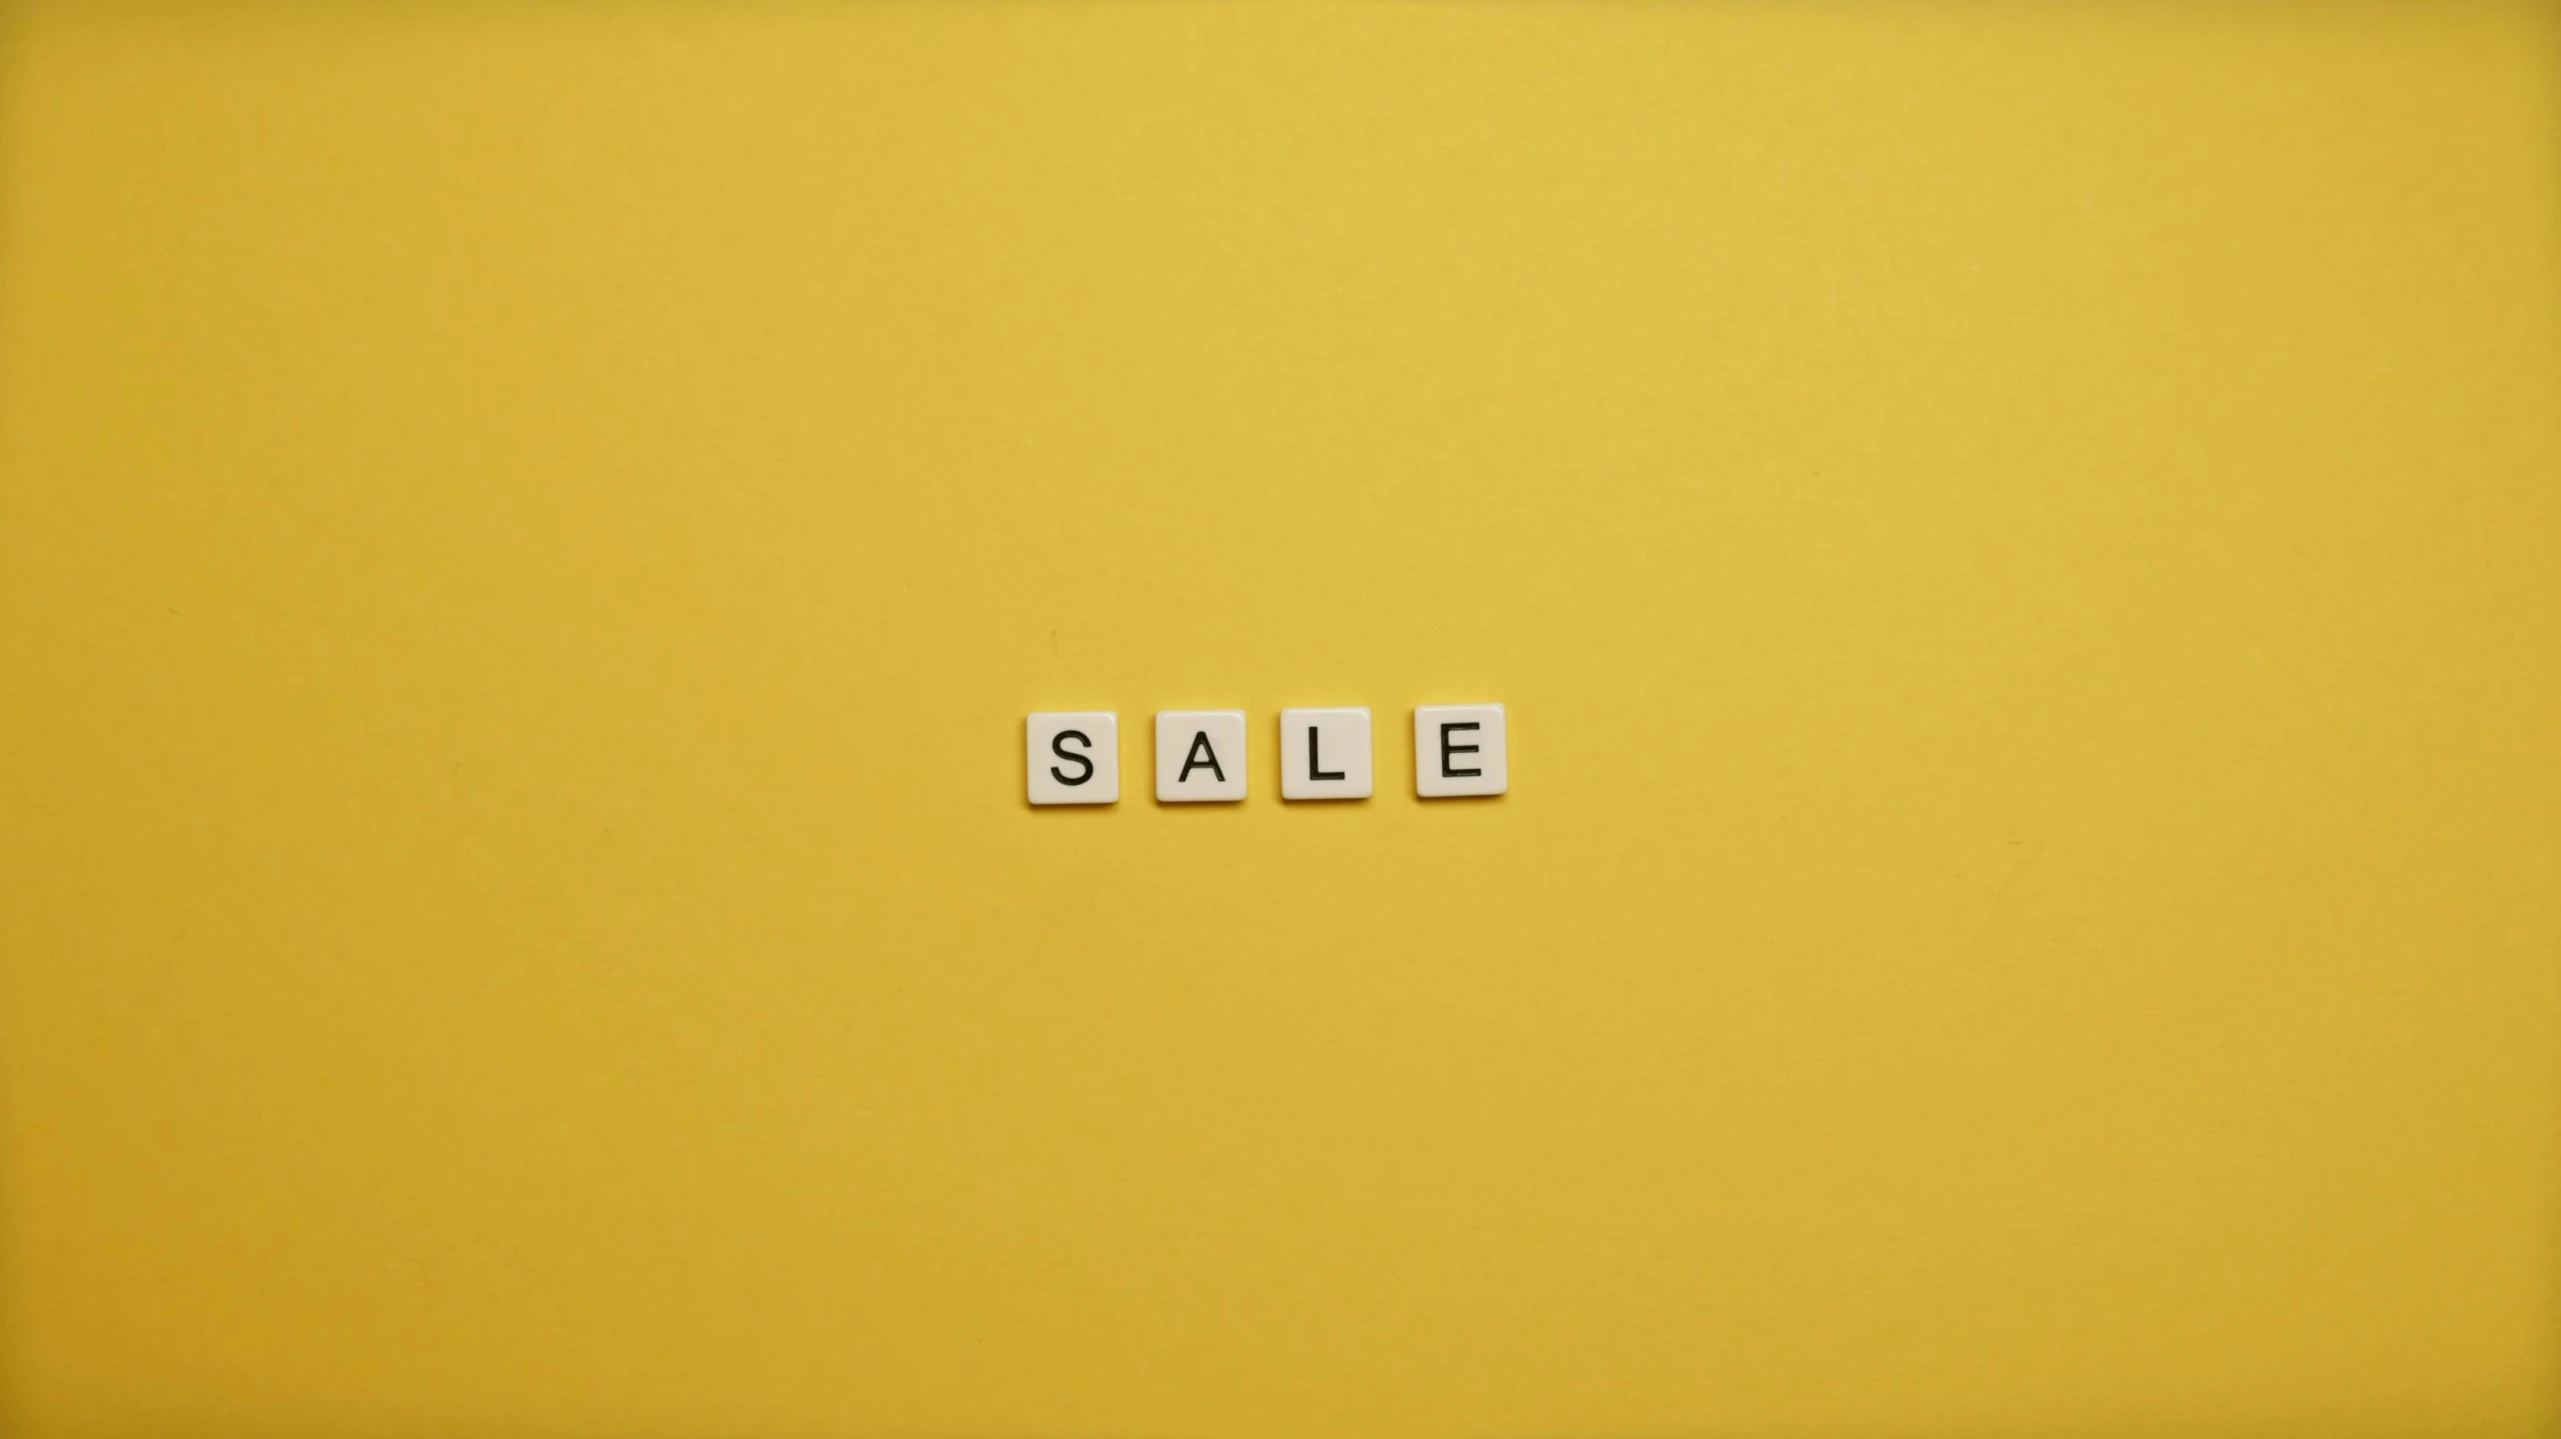 the word sale spelled in scrabbles on a yellow background, trending on unsplash, visual art, ignant, square enix, beige, advert